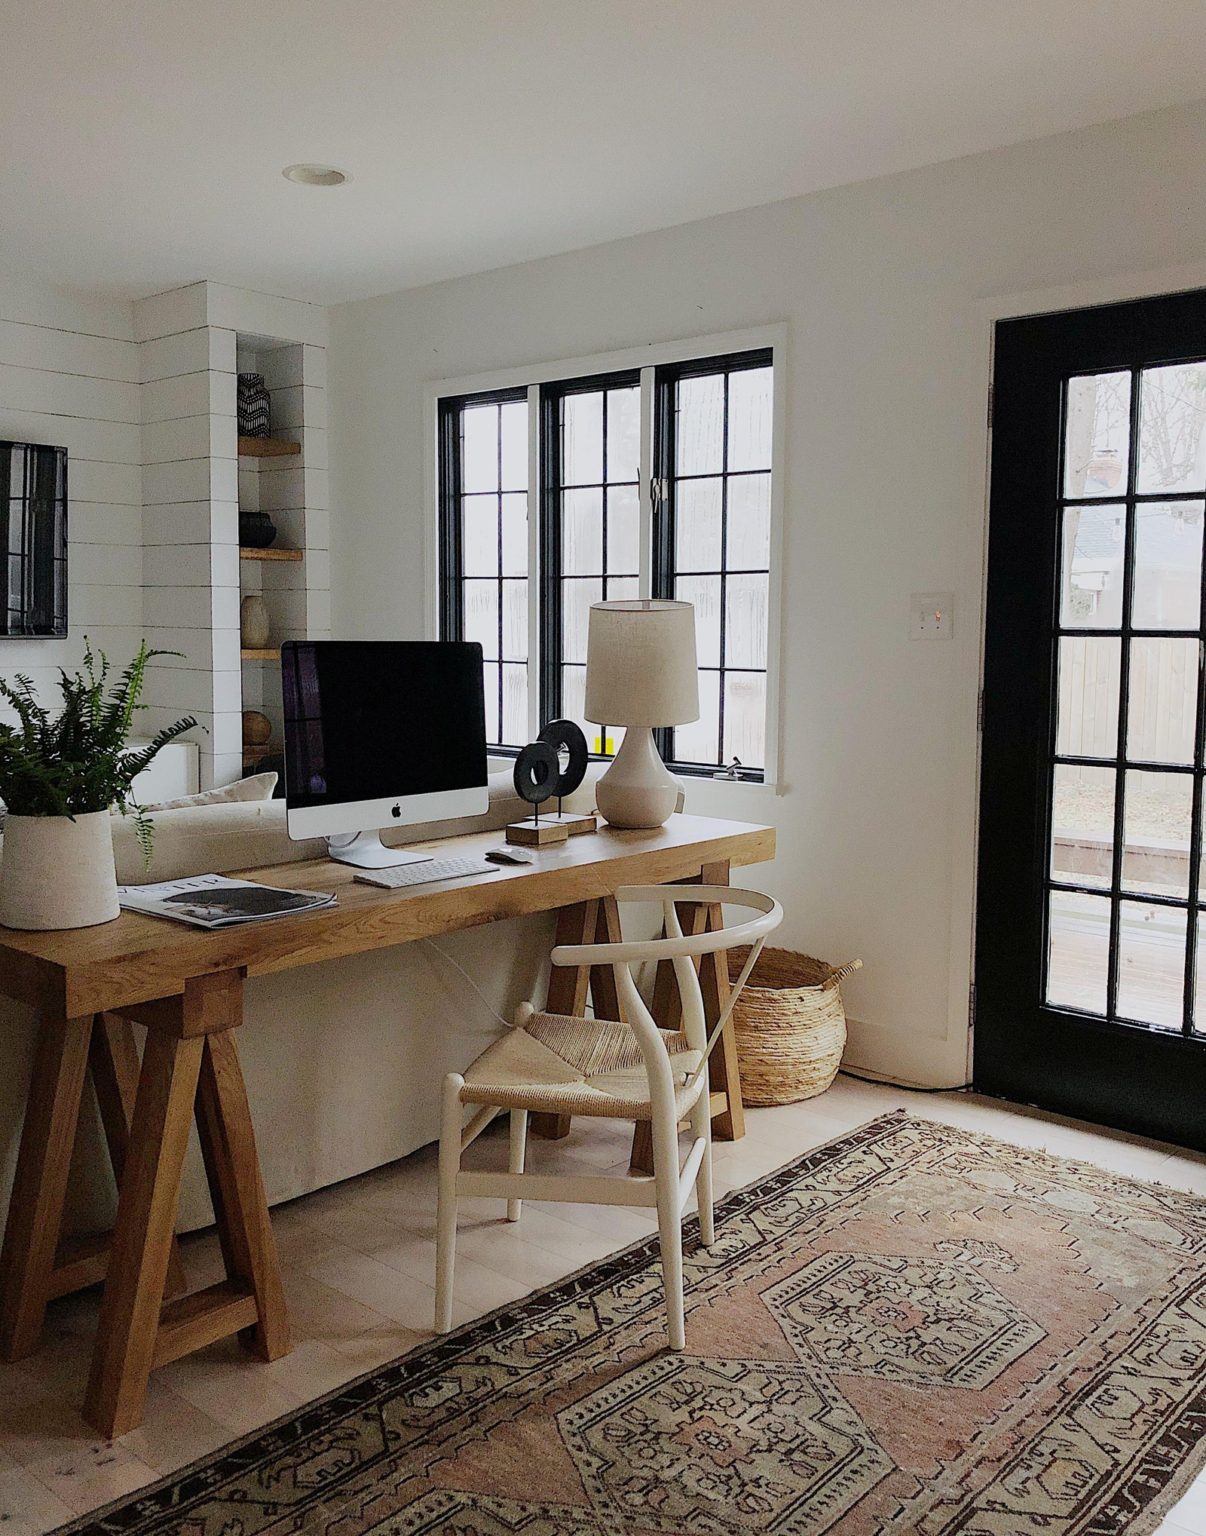 18 Creative Home Office Ideas That Will Motivate And Inspire You